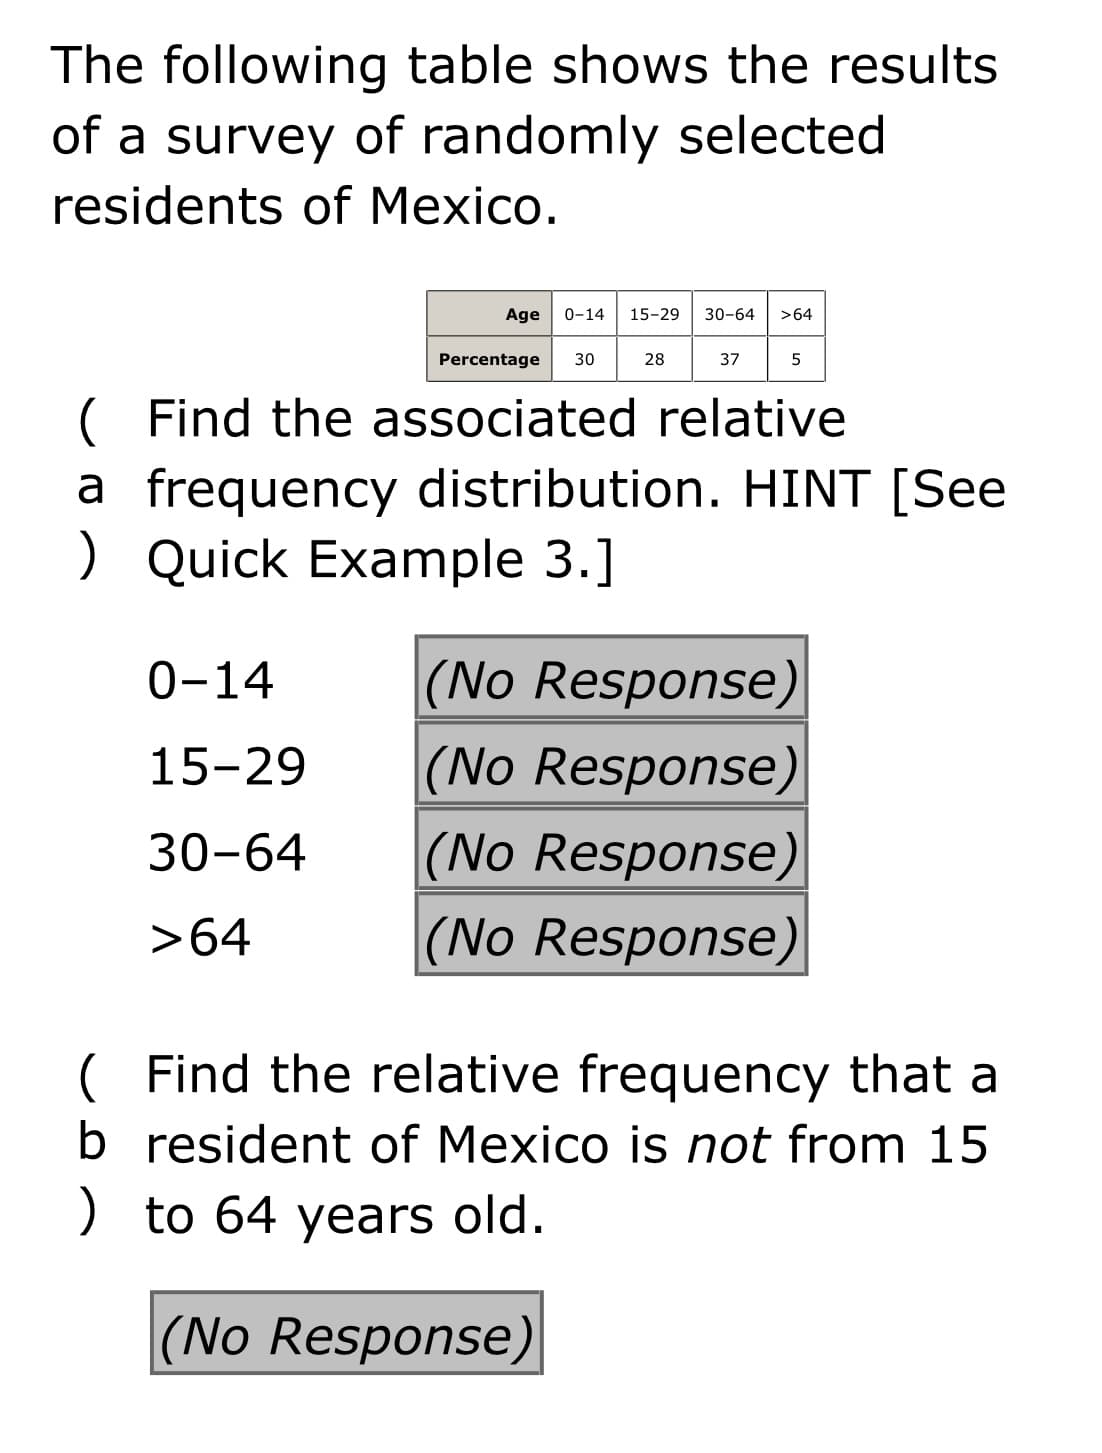 The following table shows the results
of a survey of randomly selected
residents of Mexico.
Age
0-14
15-29
30-64
>64
Percentage
30
28
37
5
( Find the associated relative
a frequency distribution. HINT [See
) Quick Example 3.]
(No Response)
(No Response)
(No Response)
(No Response)
0-14
15-29
30-64
>64
( Find the relative frequency that a
b resident of Mexico is not from 15
) to 64 years old.
(No Response)
